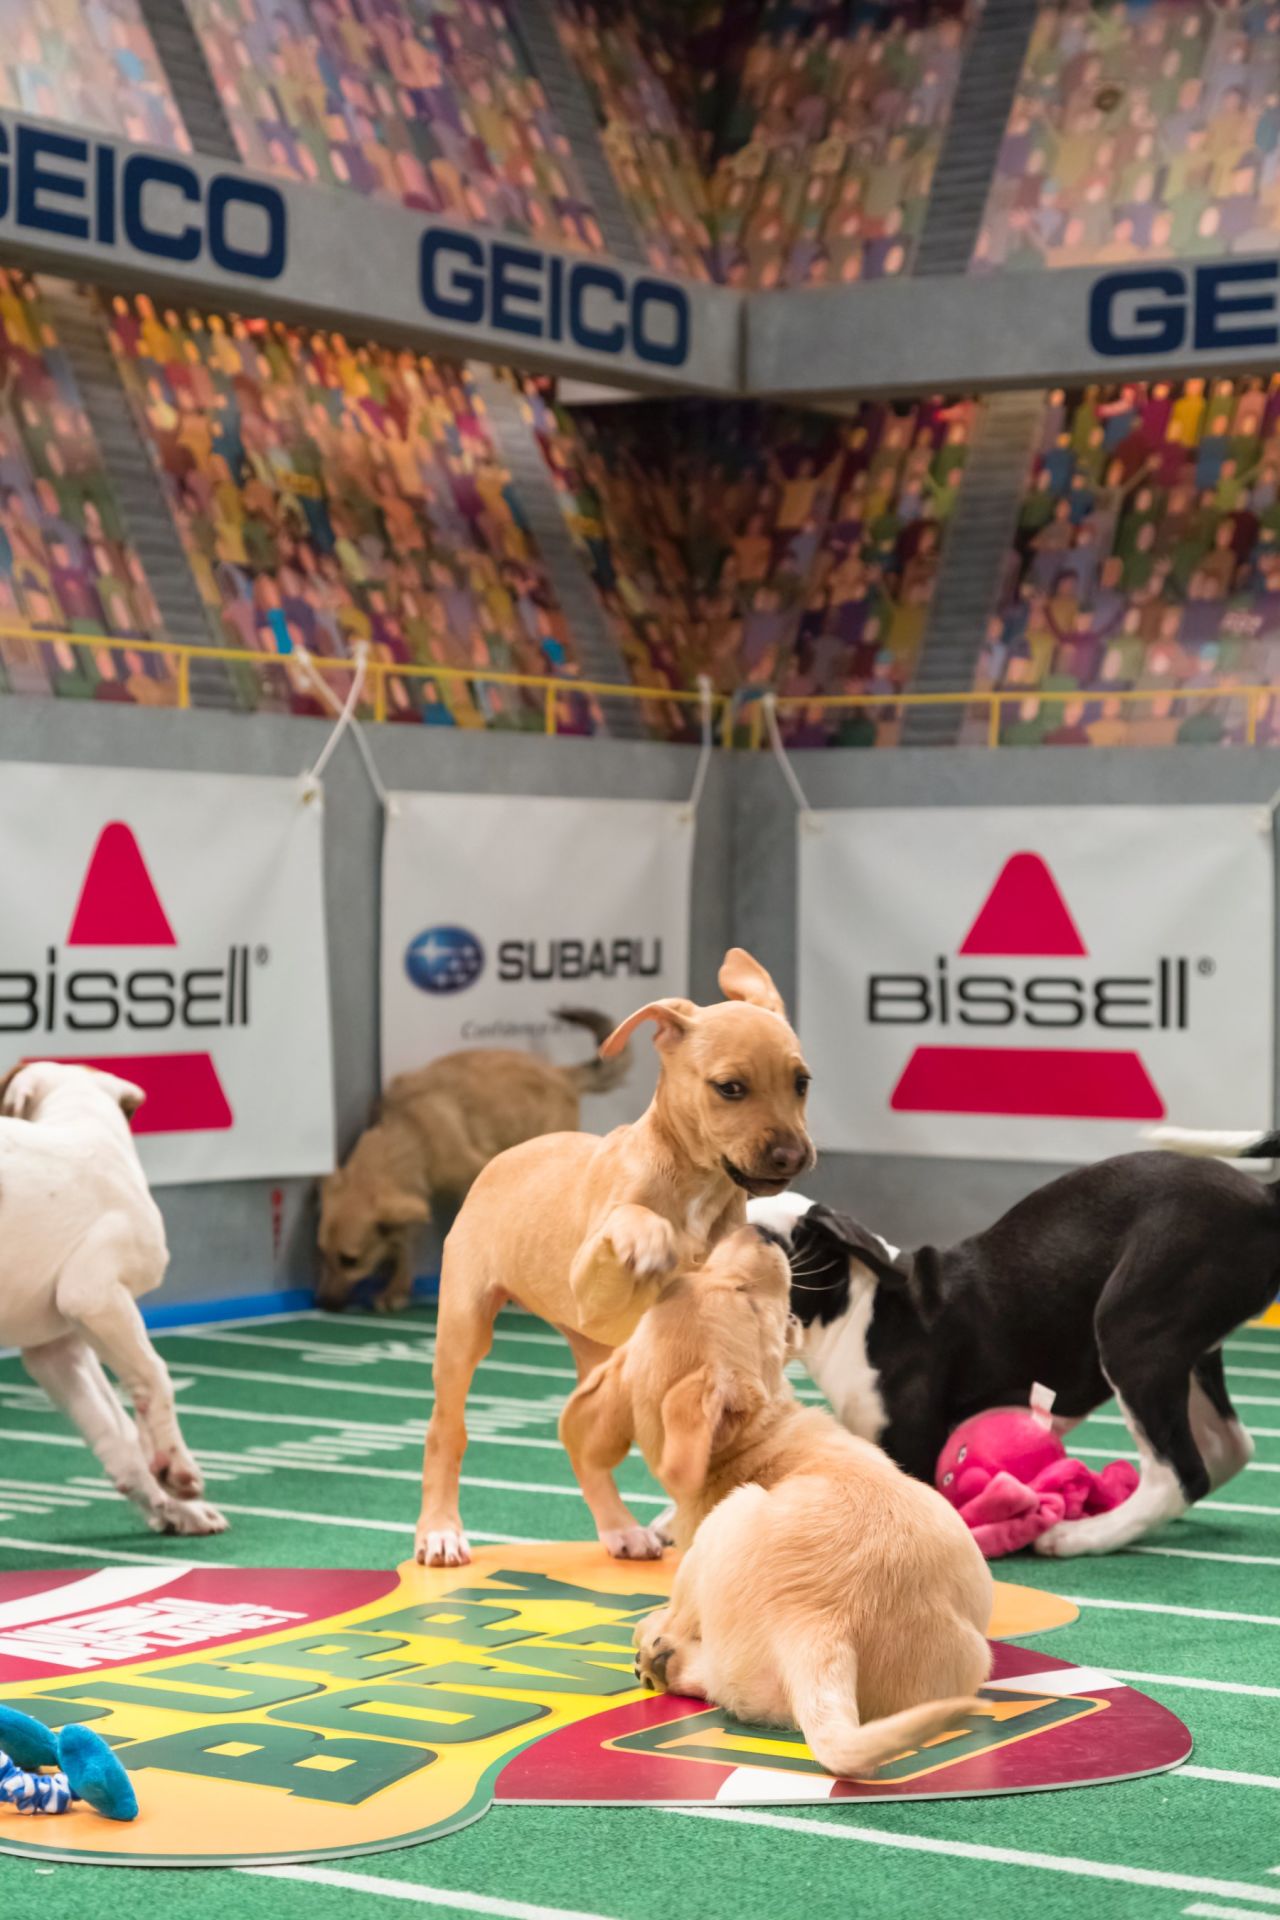 Puppy Bowl offers viewers plenty of tackling and ruff-housing.